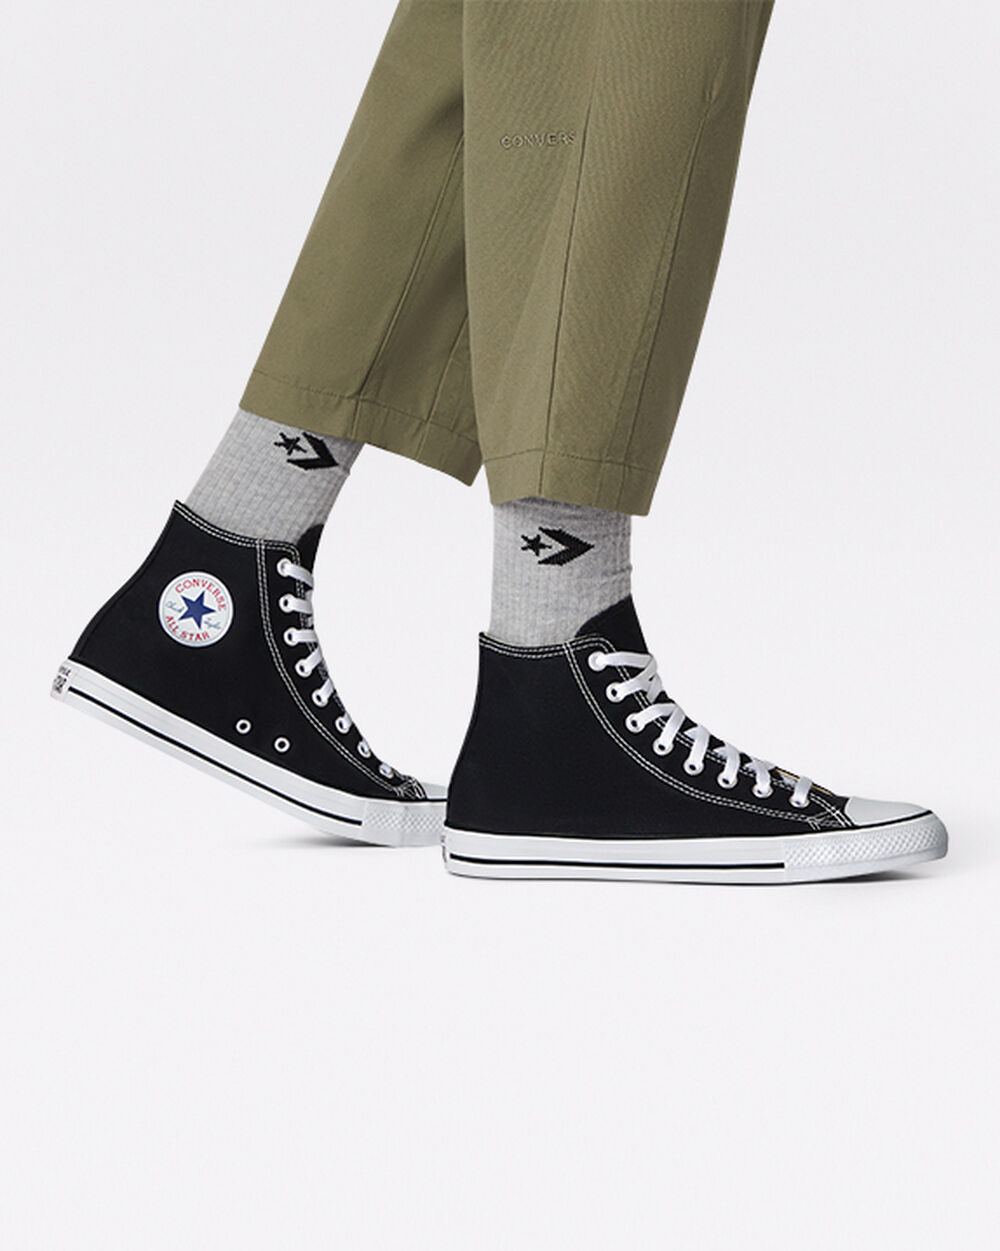 Tenis Converse Chuck Taylor All Star Mujer Negros | Mexico-643056